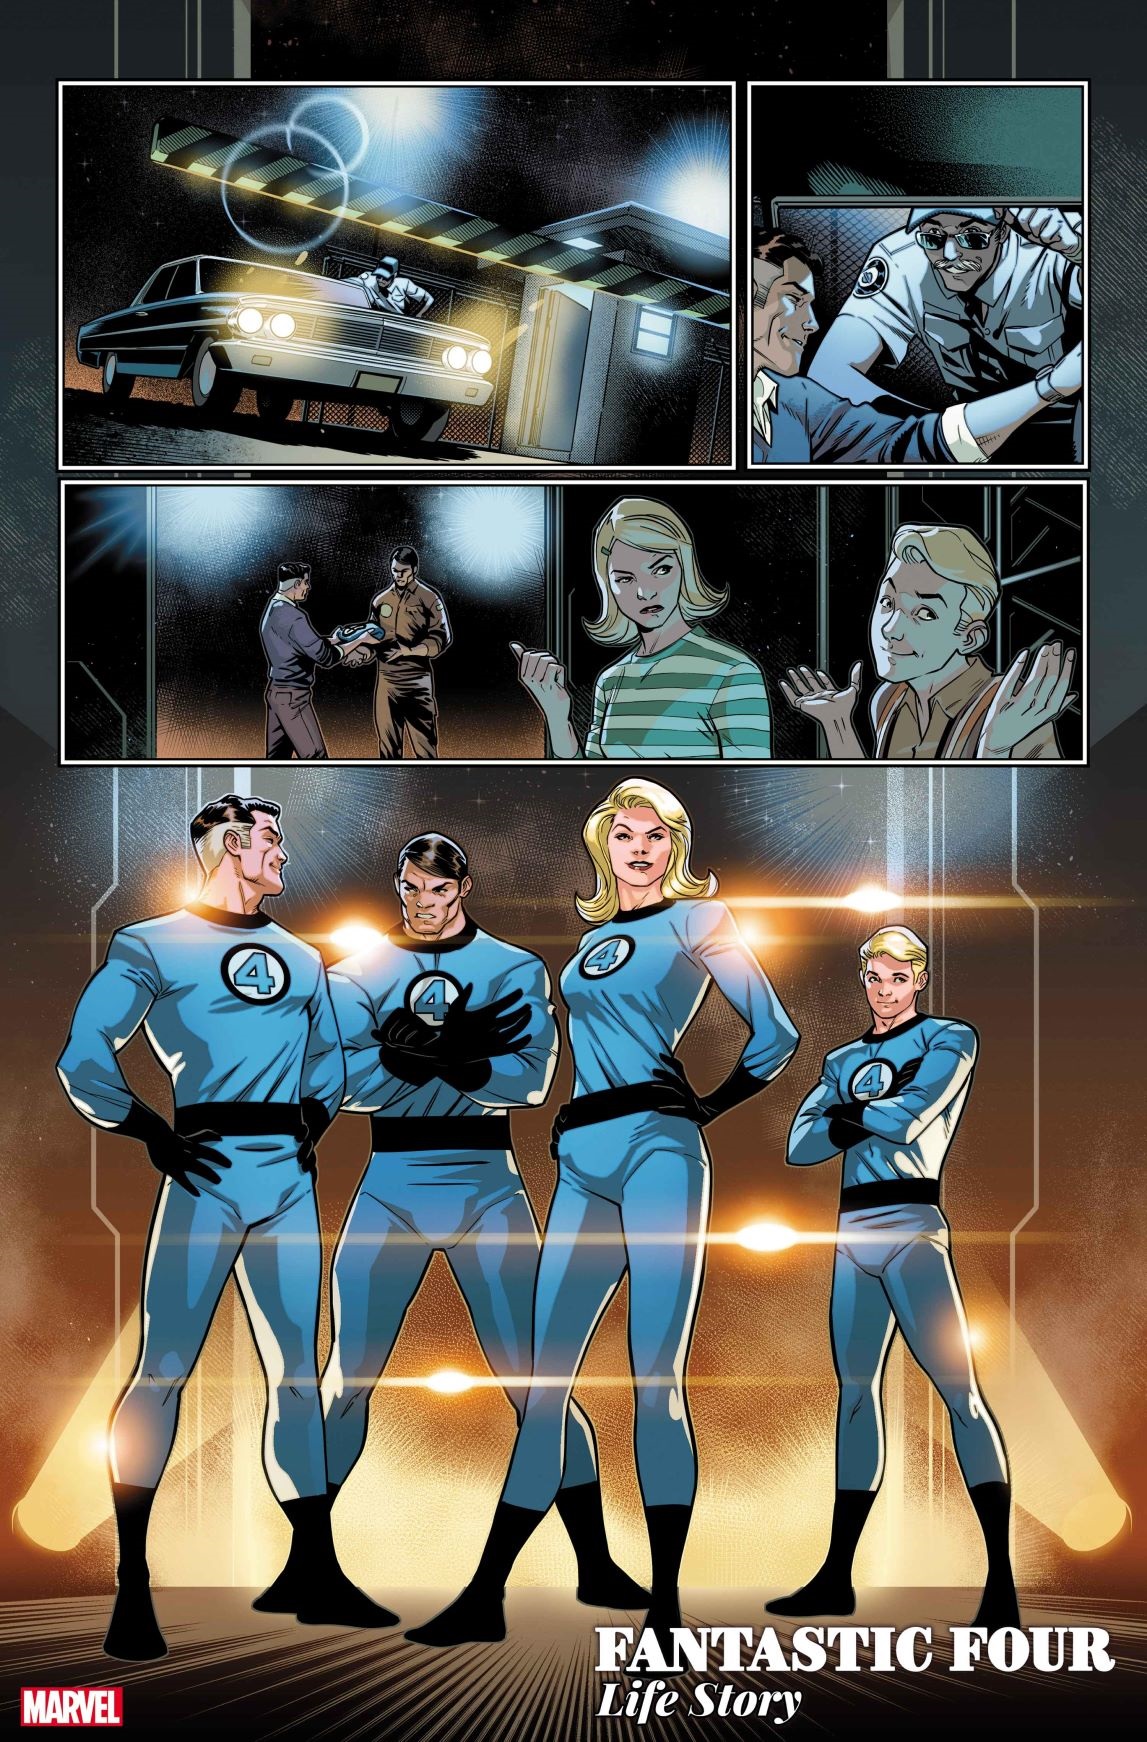 Fantastic Four Life Story #1 (Of 6)